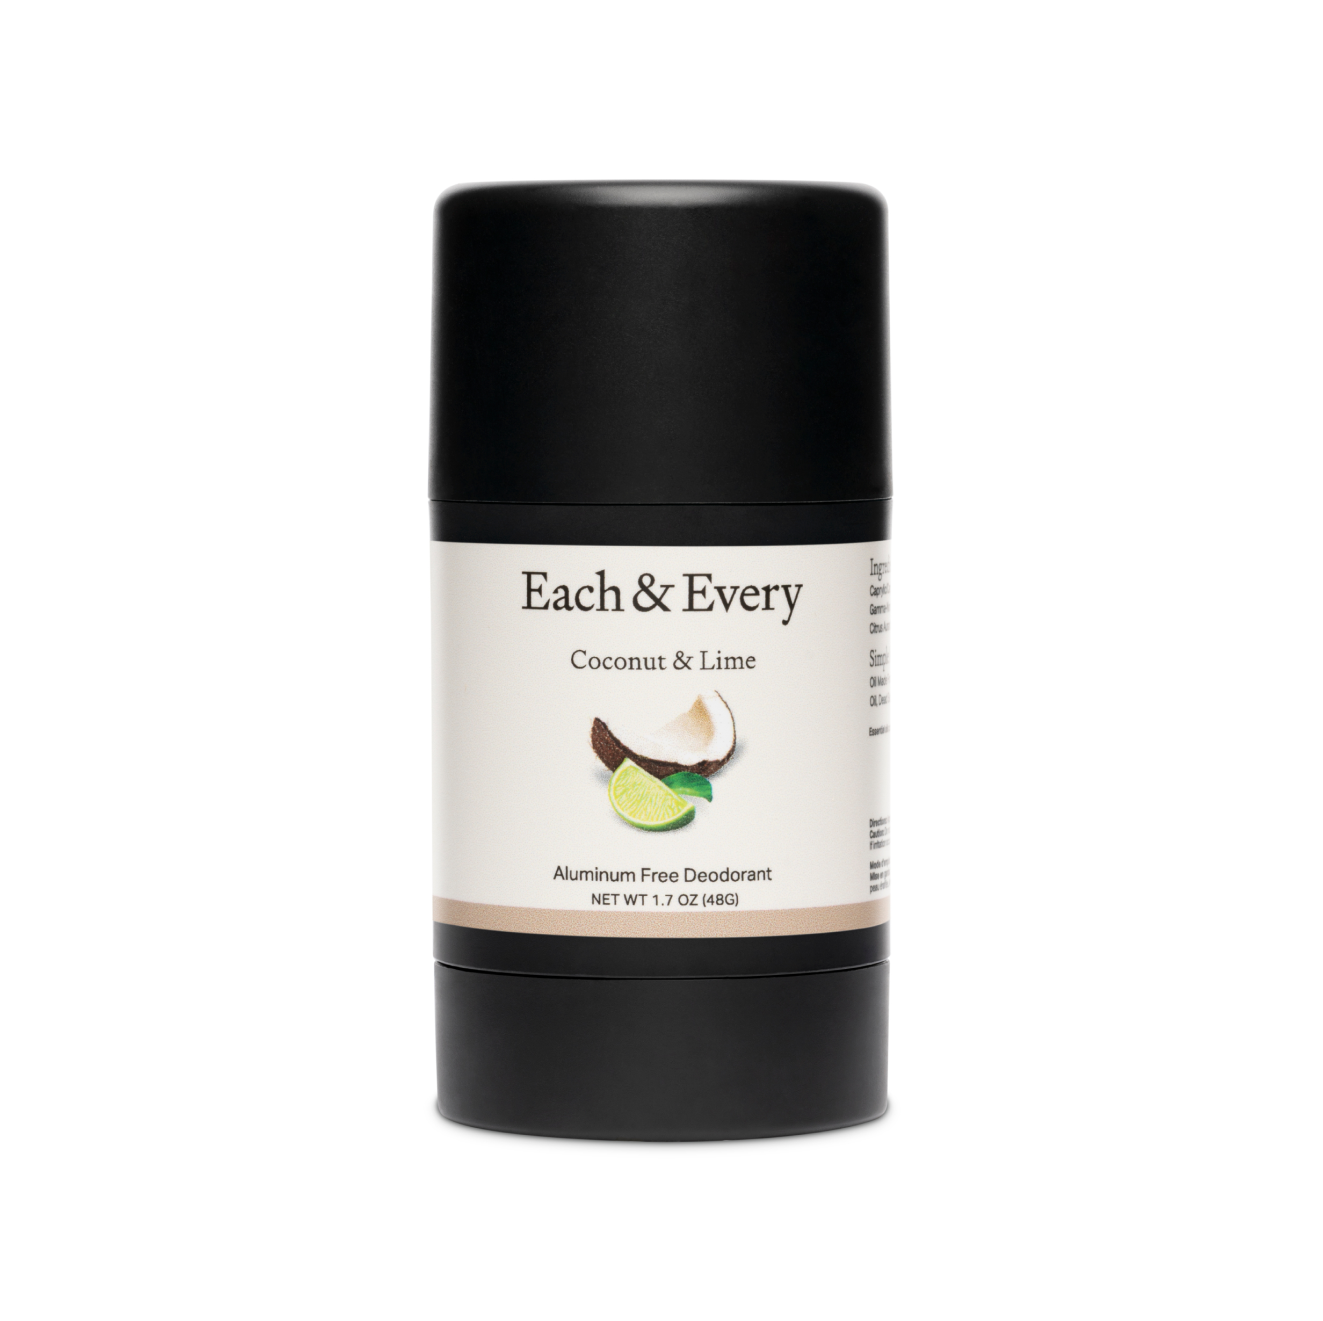 Coconut & Lime Travel Size Natural Deodorant